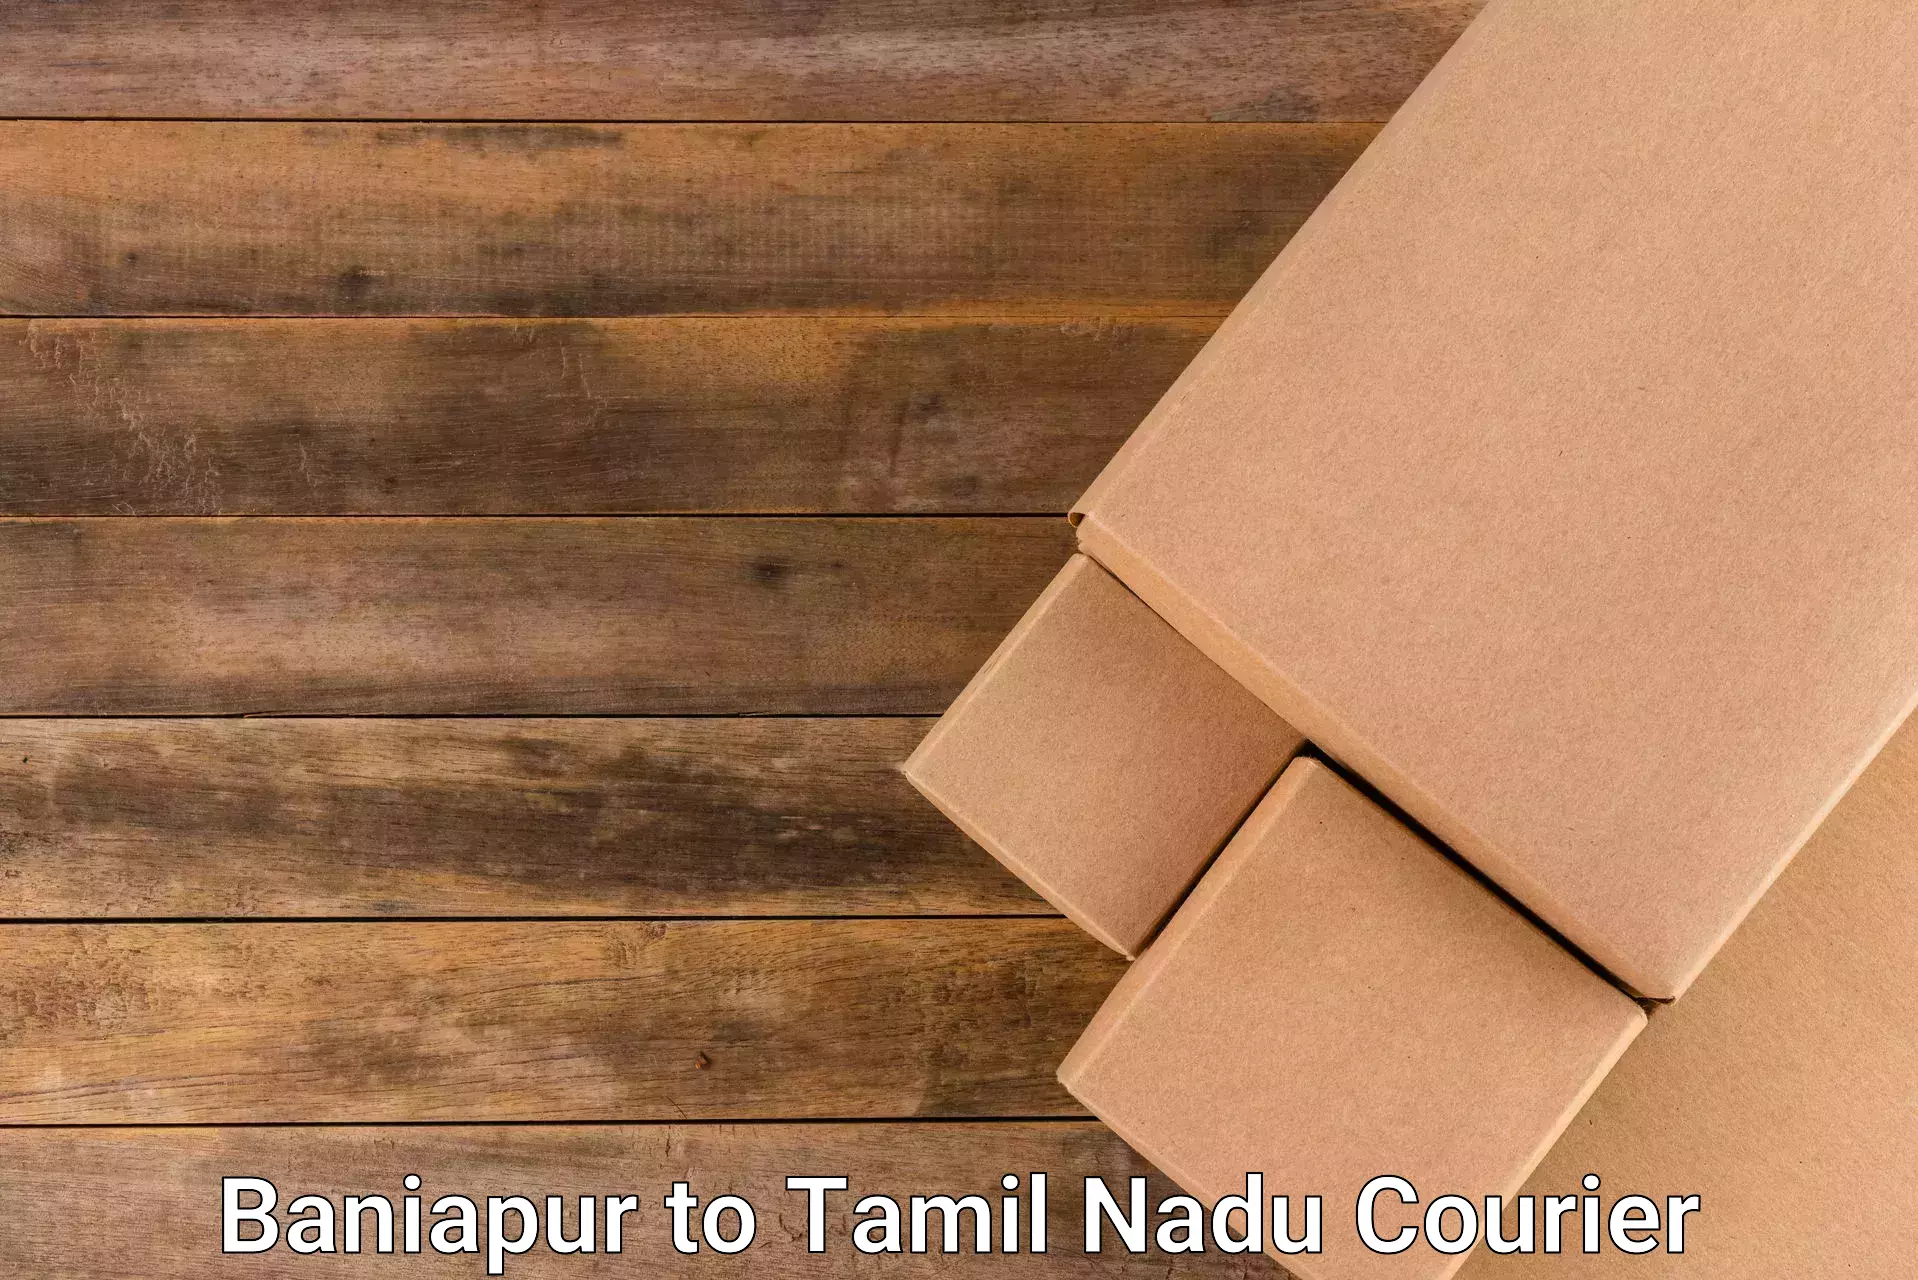 Courier services in Baniapur to Tambaram